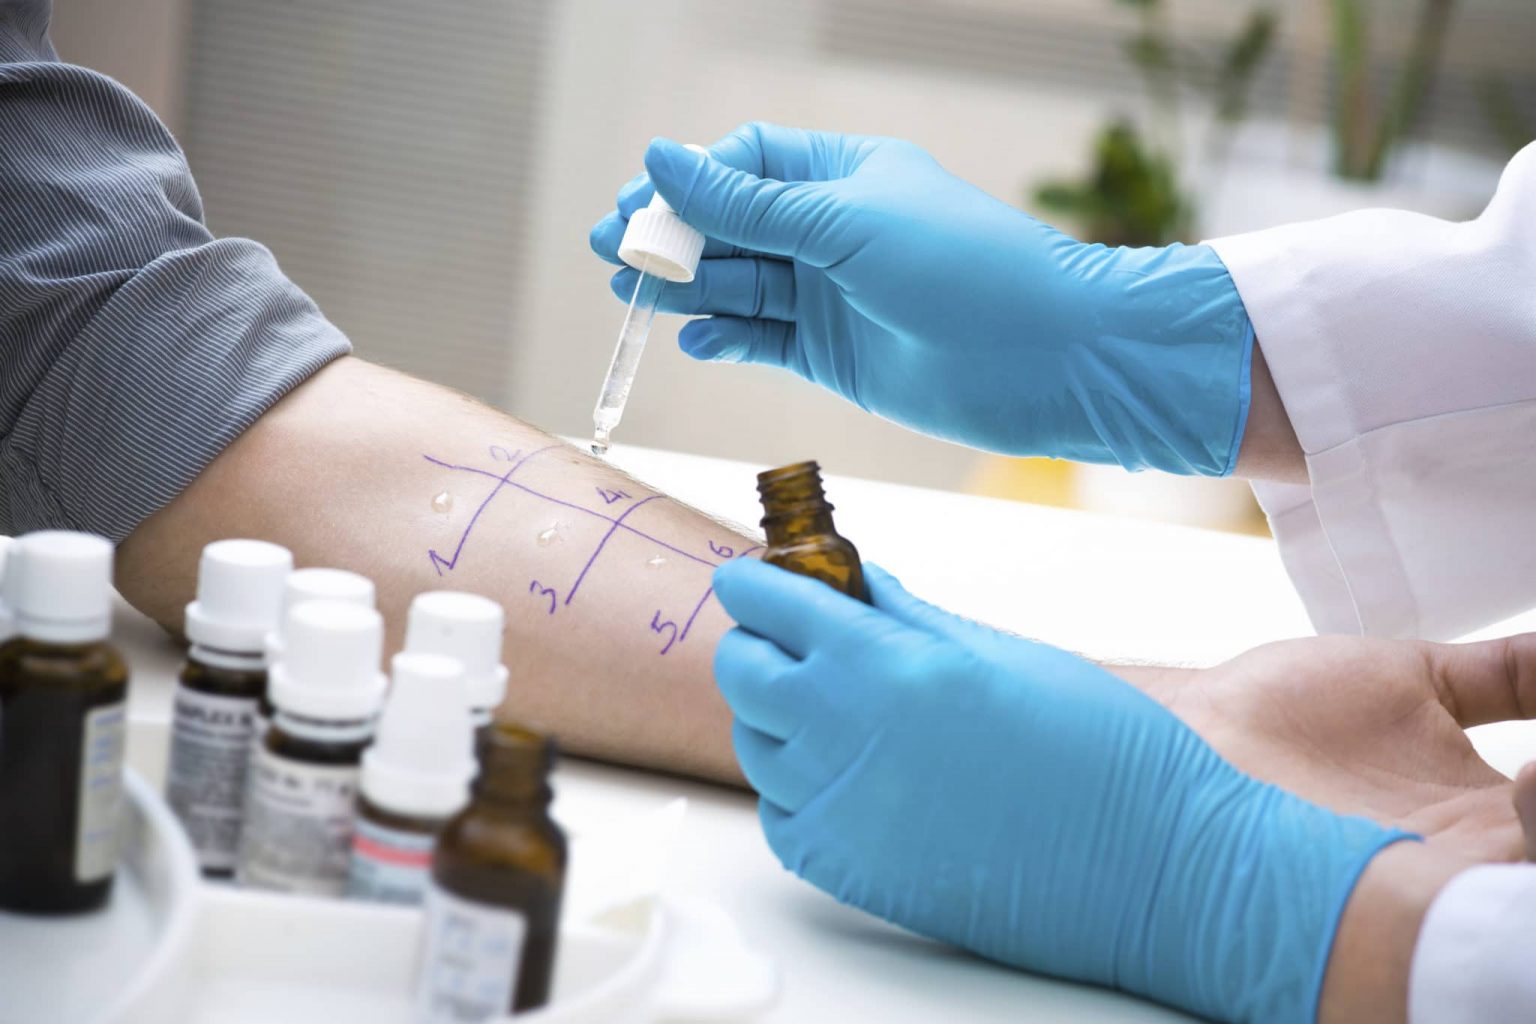 Doctor with gloves on using dropper to run an allergy test on patient's forearm